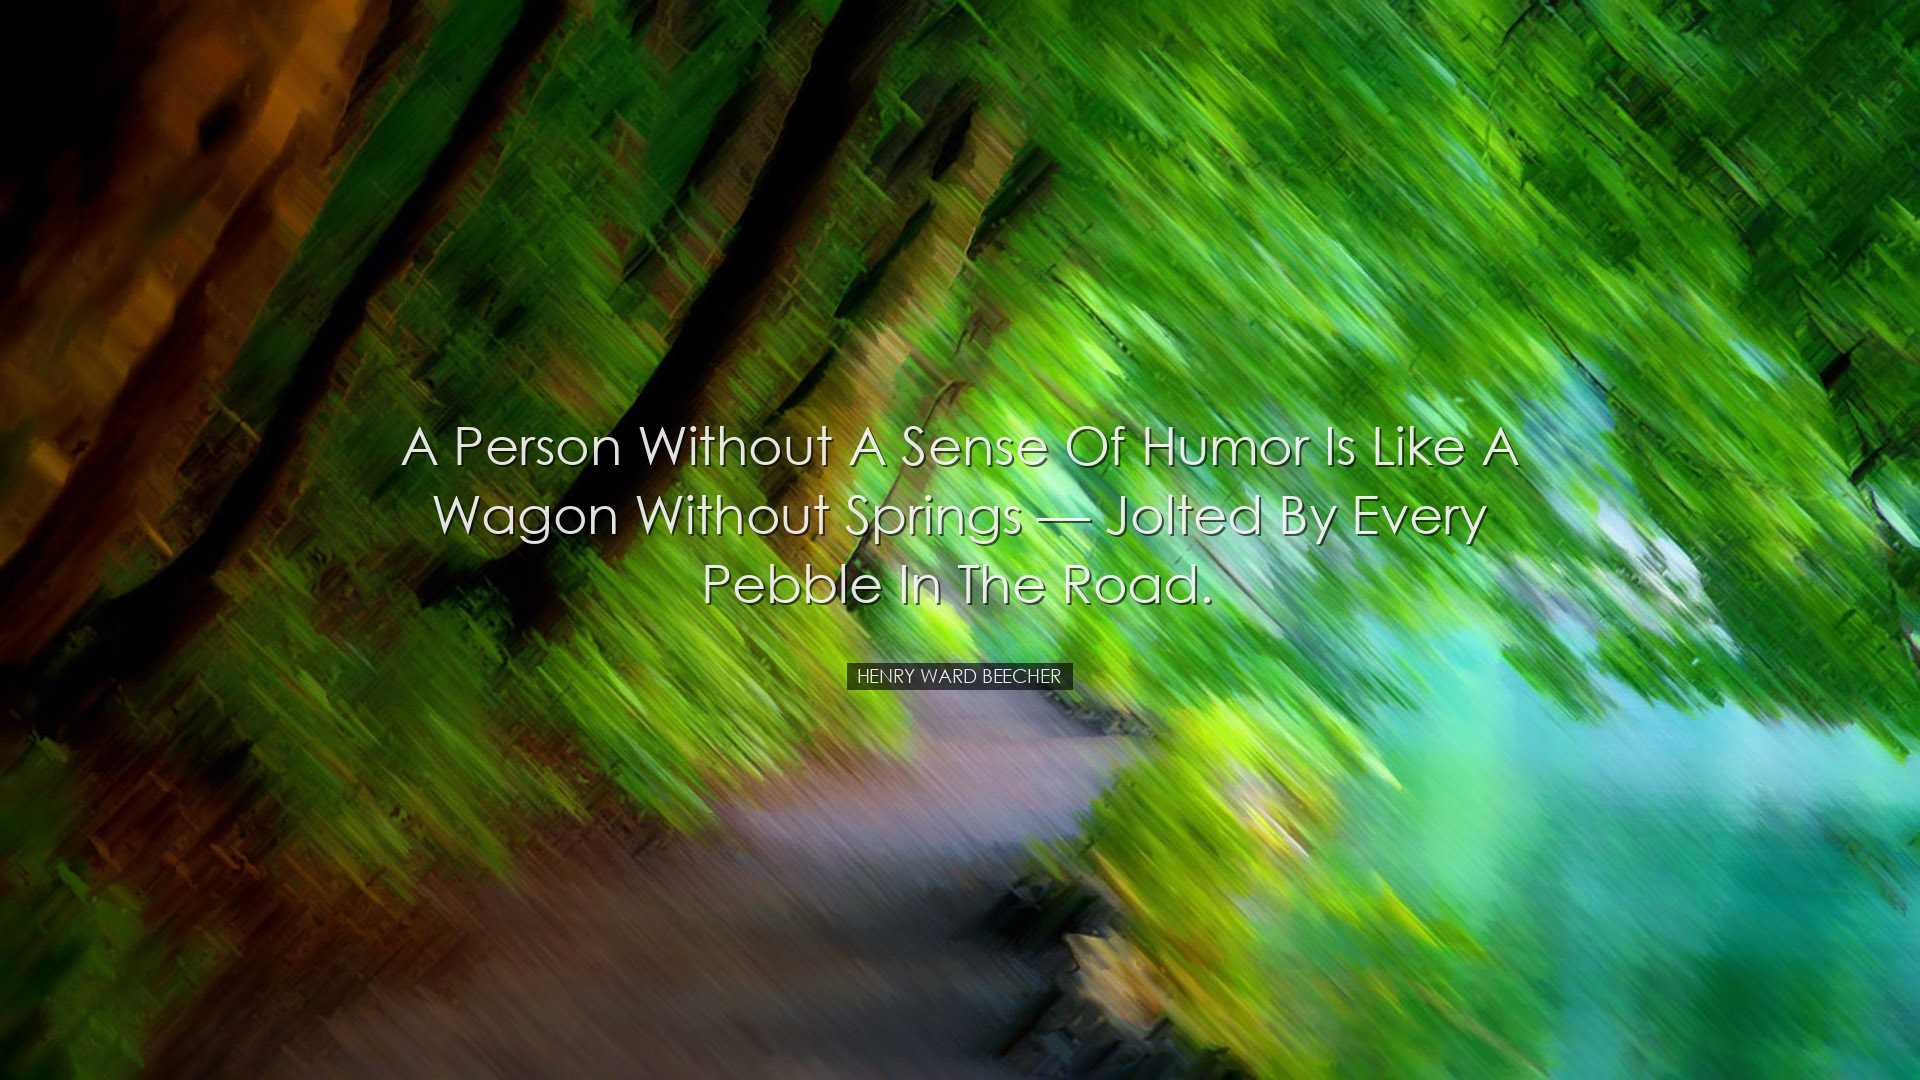 A person without a sense of humor is like a wagon without springs